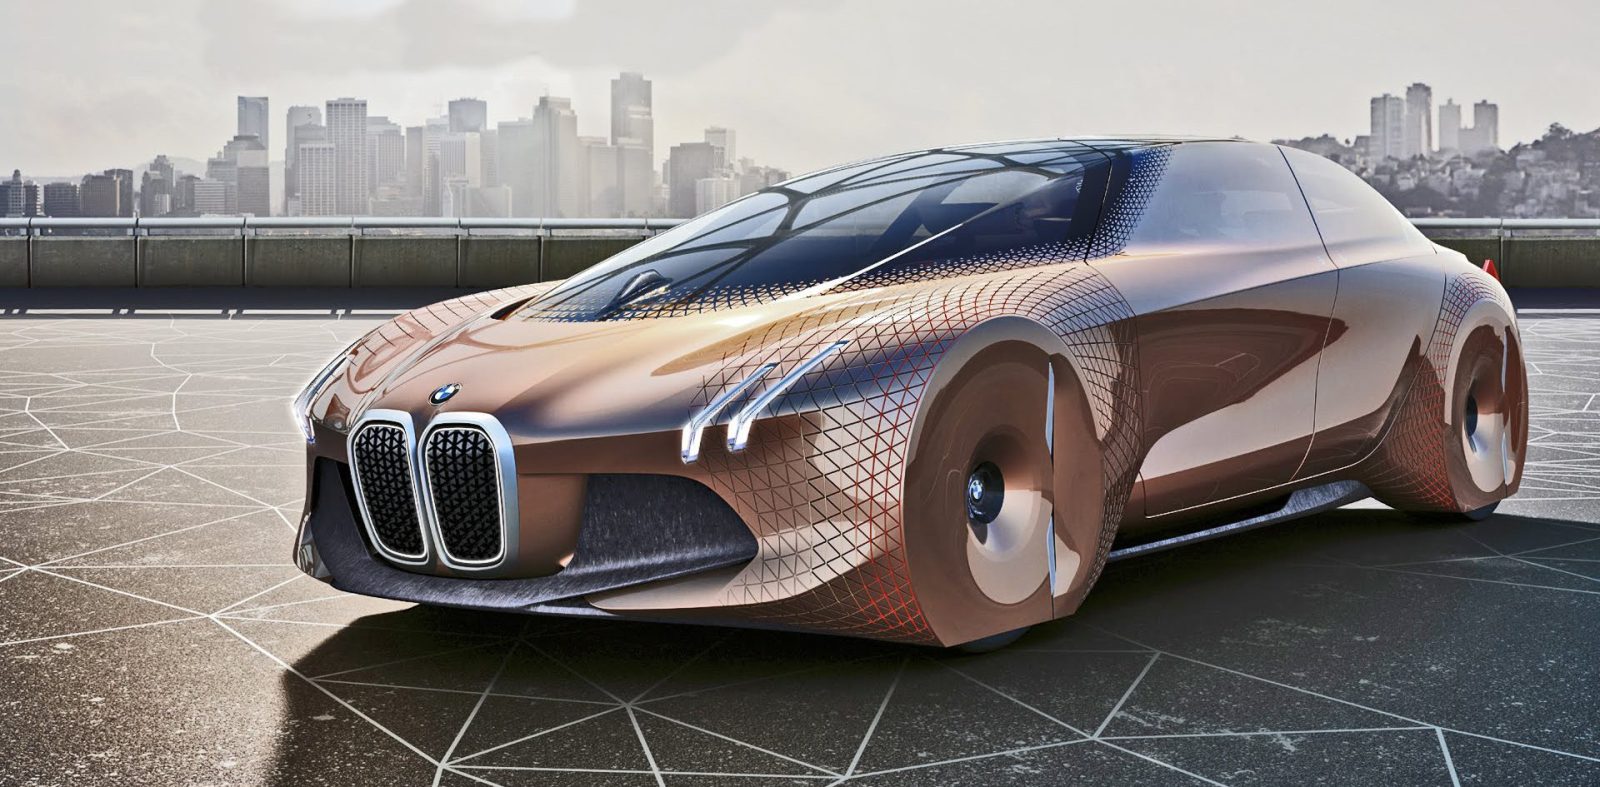 BMW invests in solidstate batteries with '23X' energy capacity for